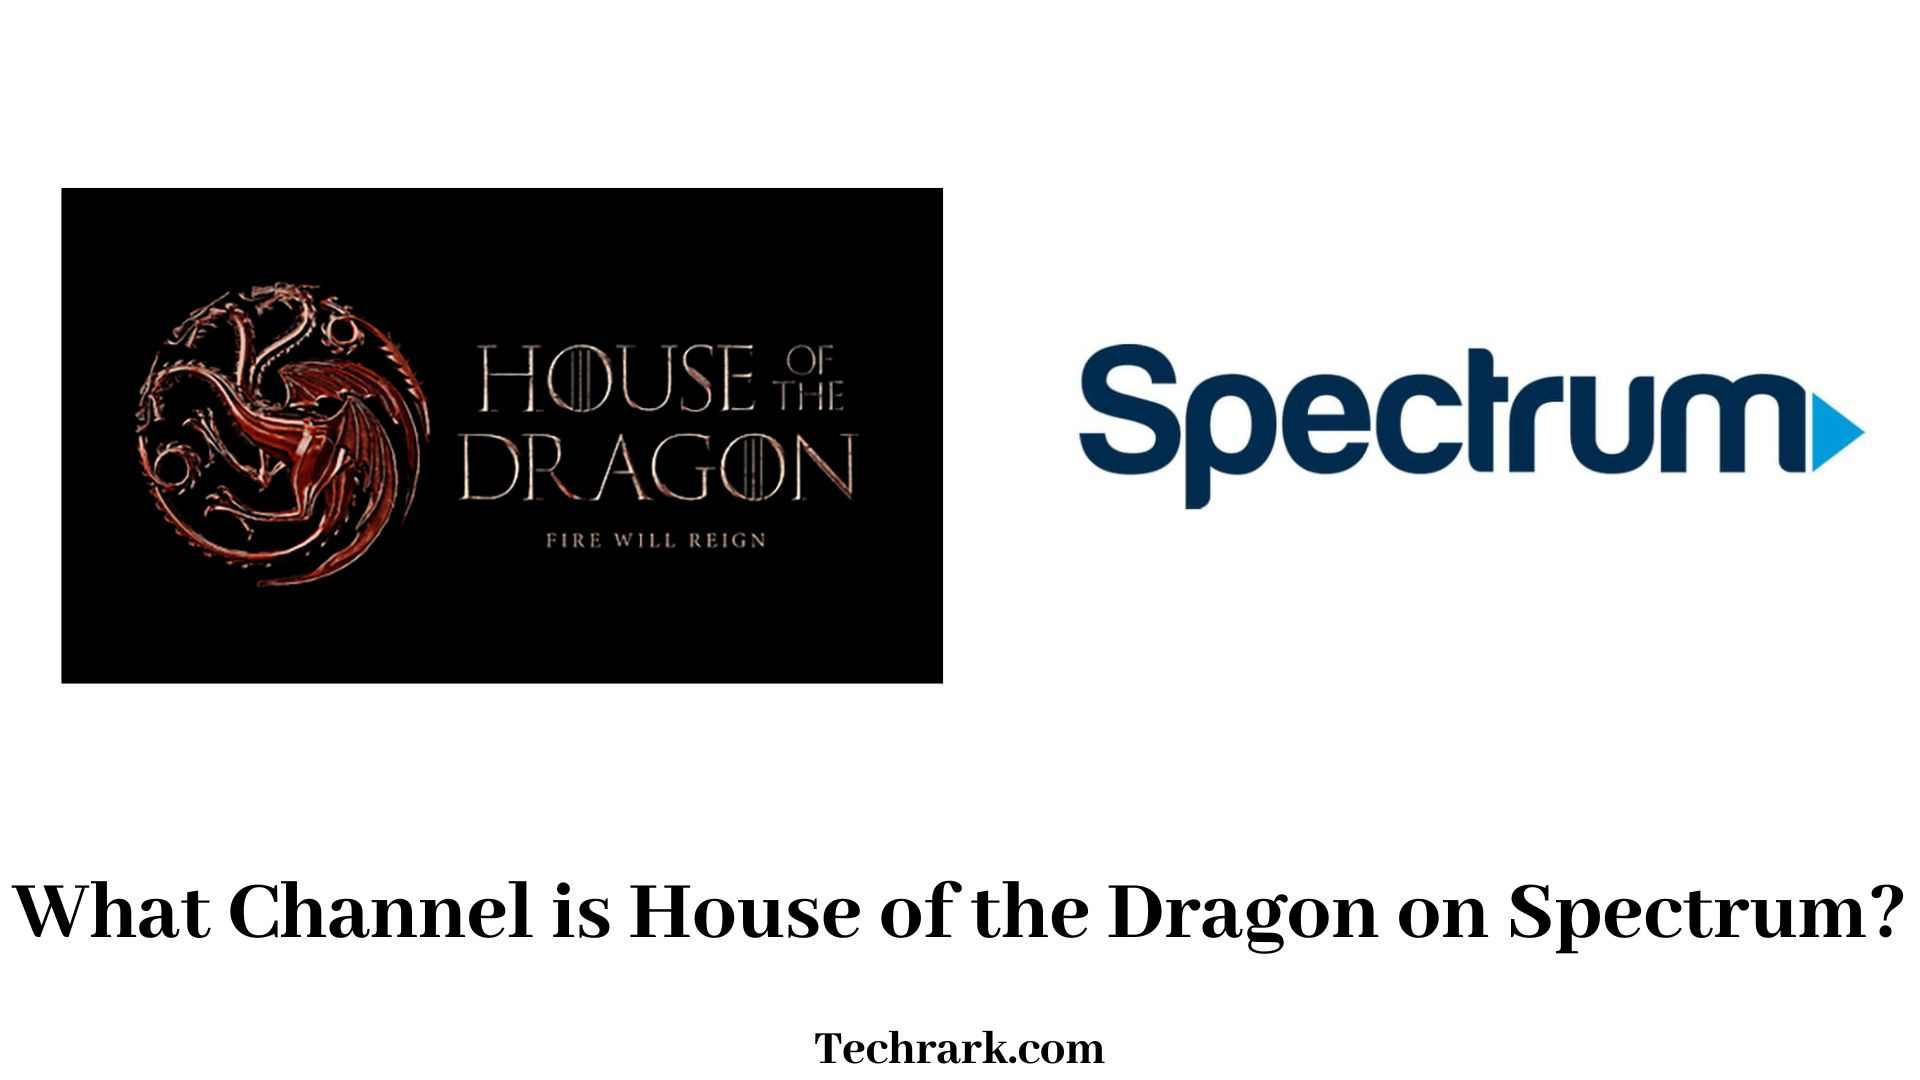 What Channel is House of the Dragon on Spectrum